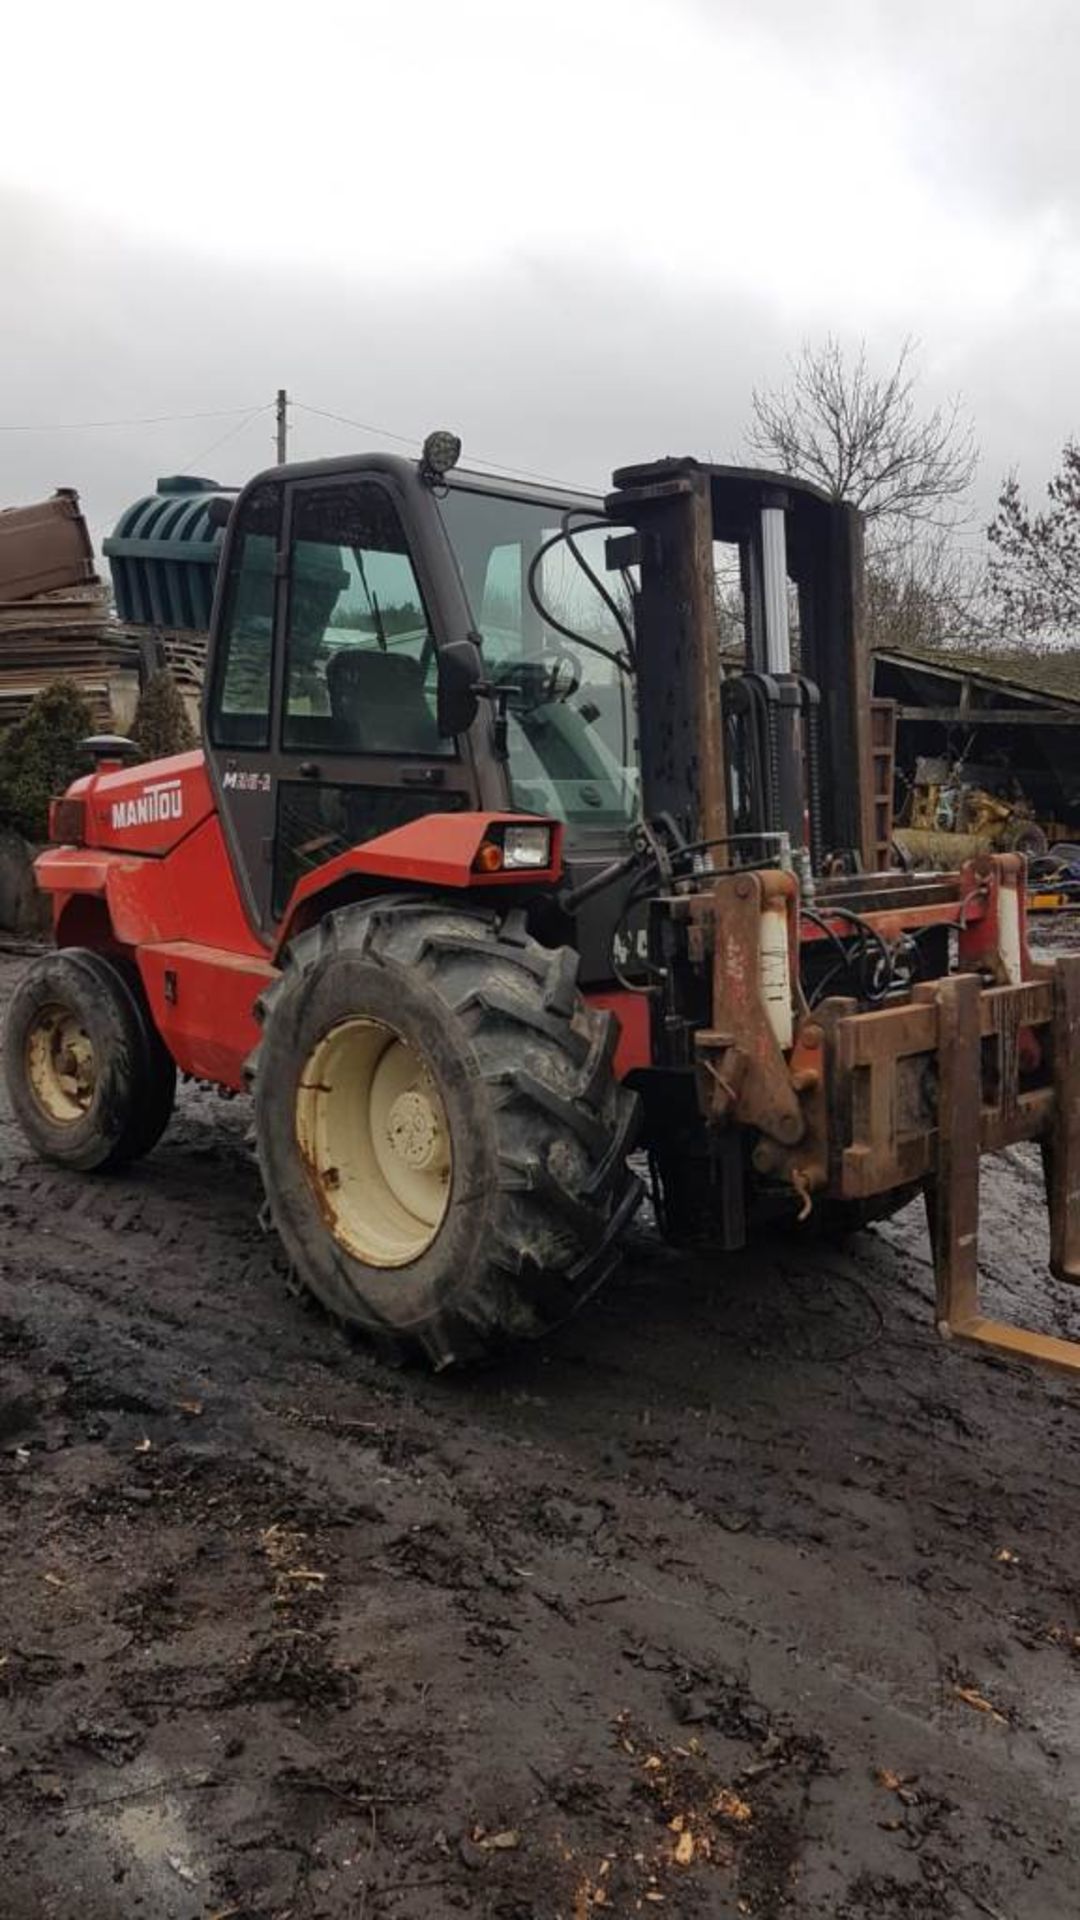 MANITOU M26 ROUGH TERRAIN FORKLIFT, YEAR 2000 BUILD, TRIPLE MAST, HYDRAULIC TIPPING ATTACHMENT AS